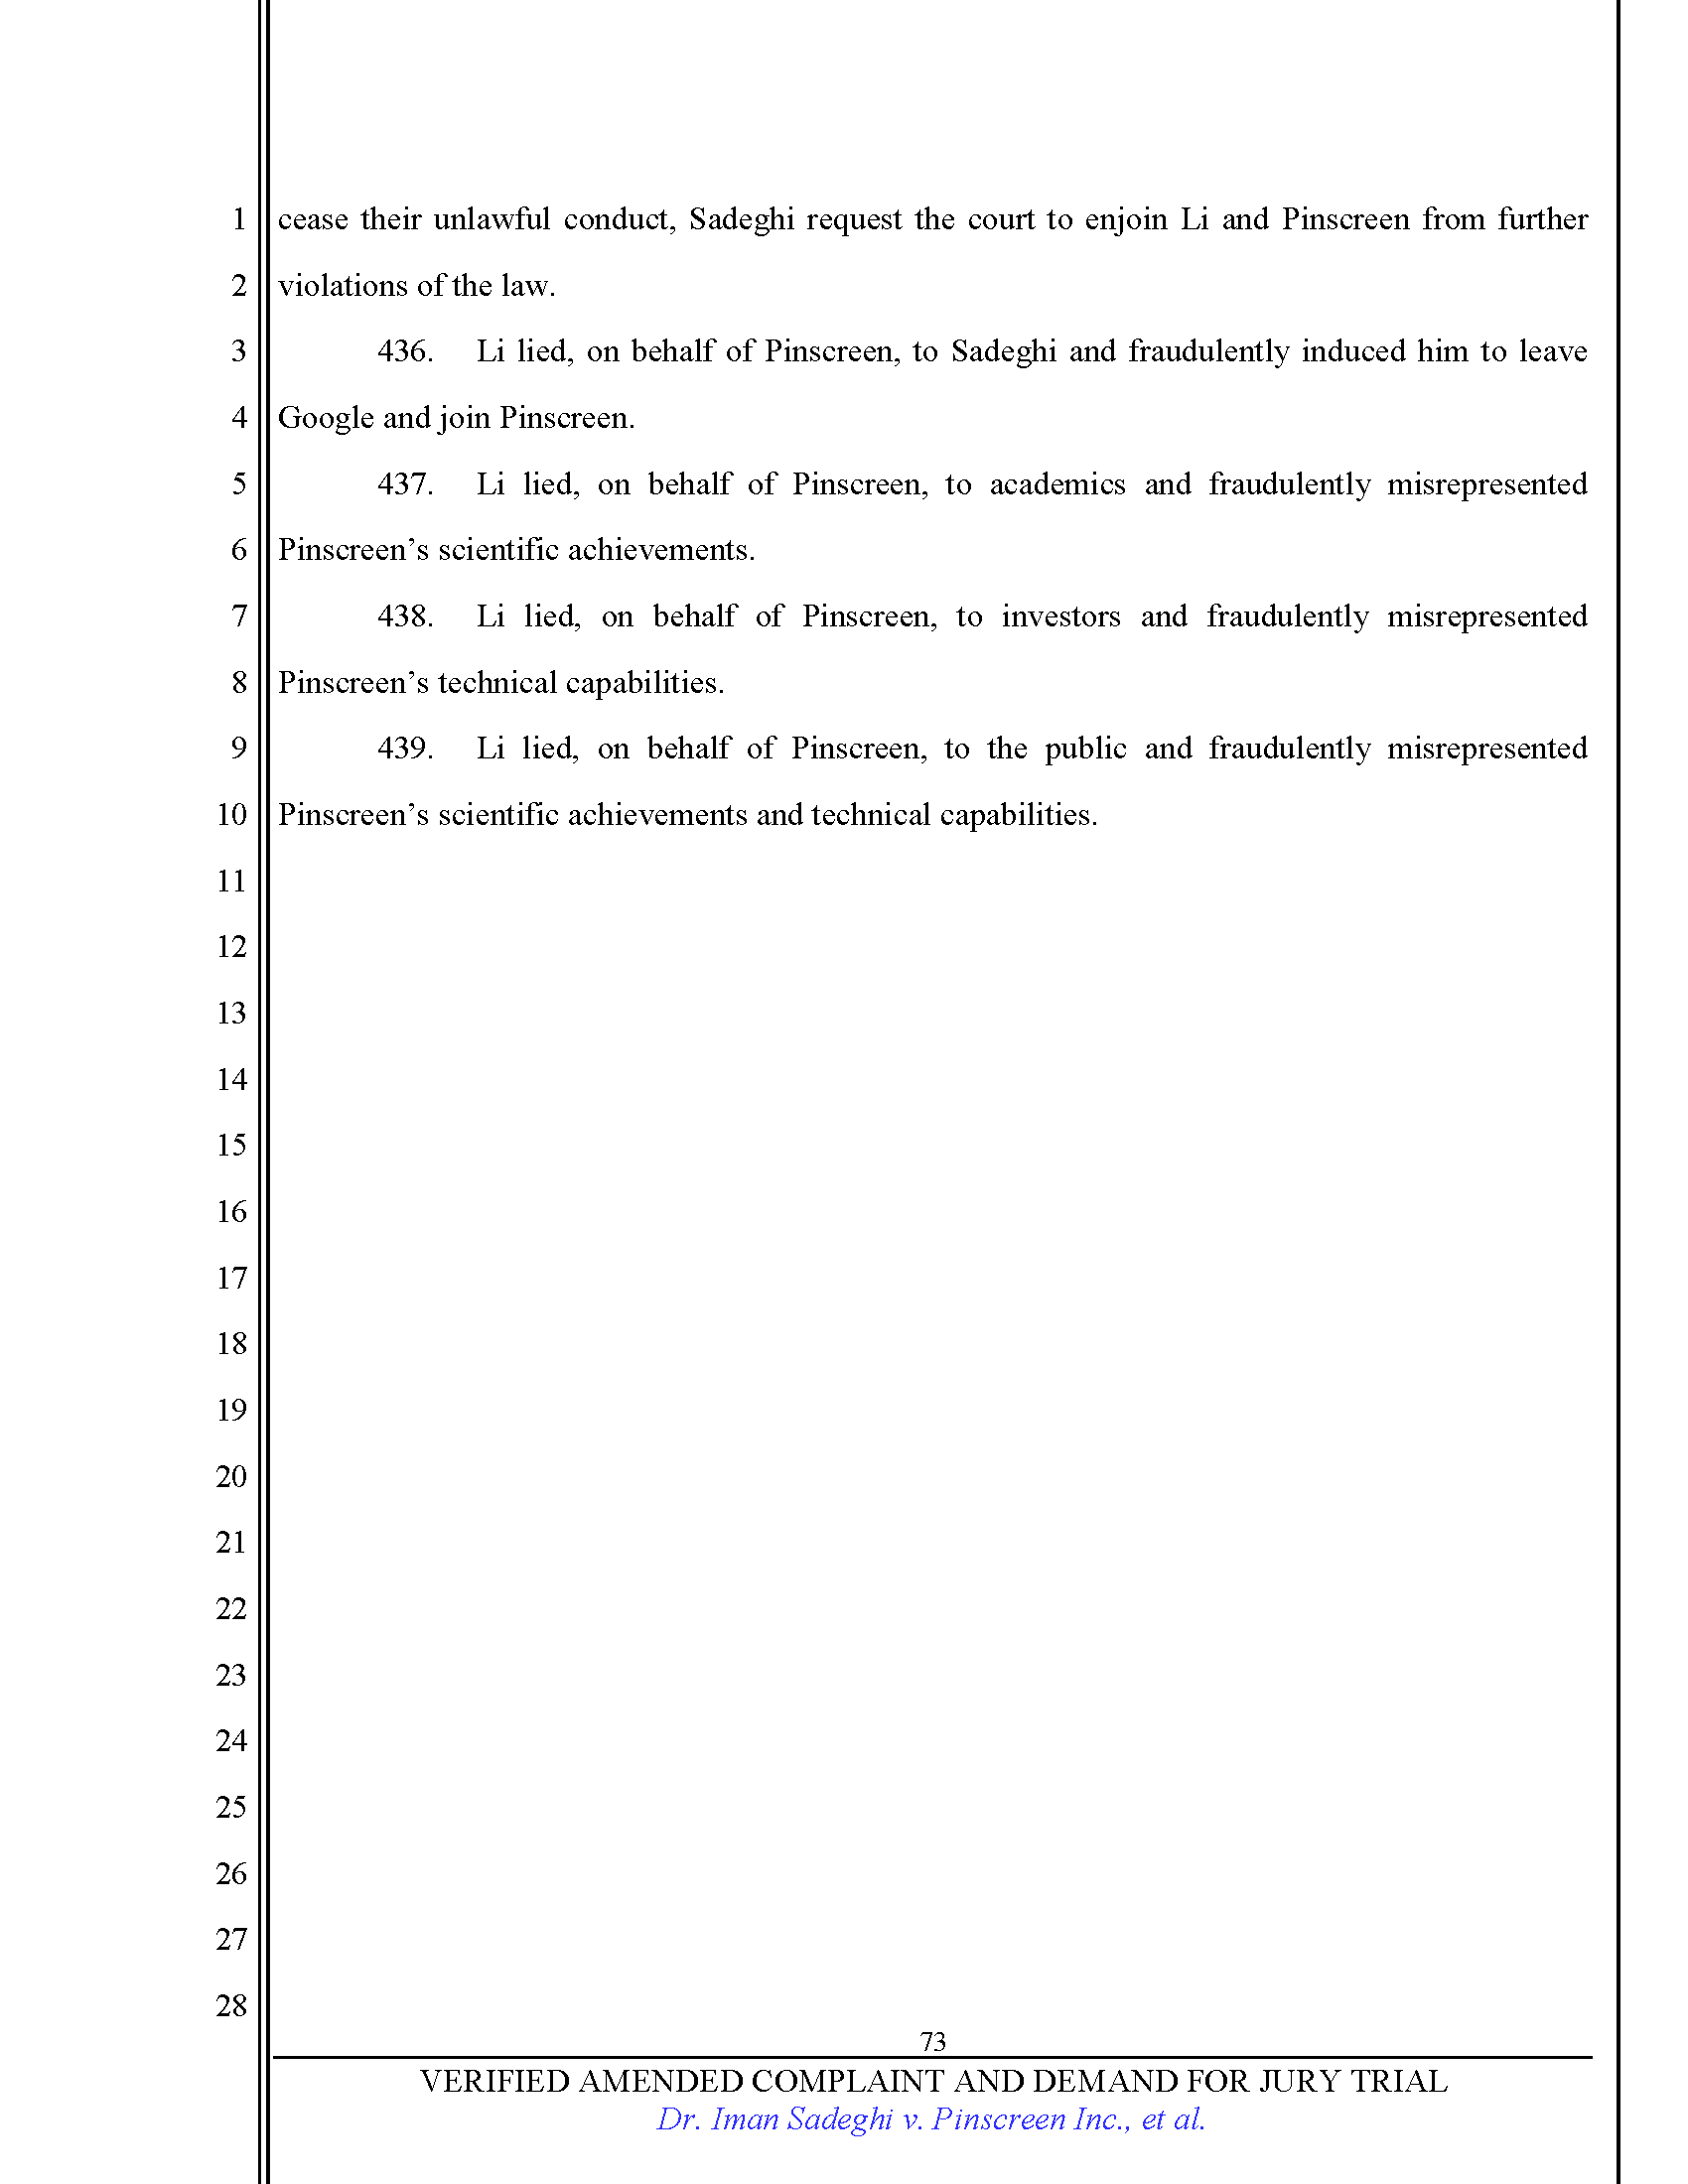 First Amended Complaint (FAC) Page 73